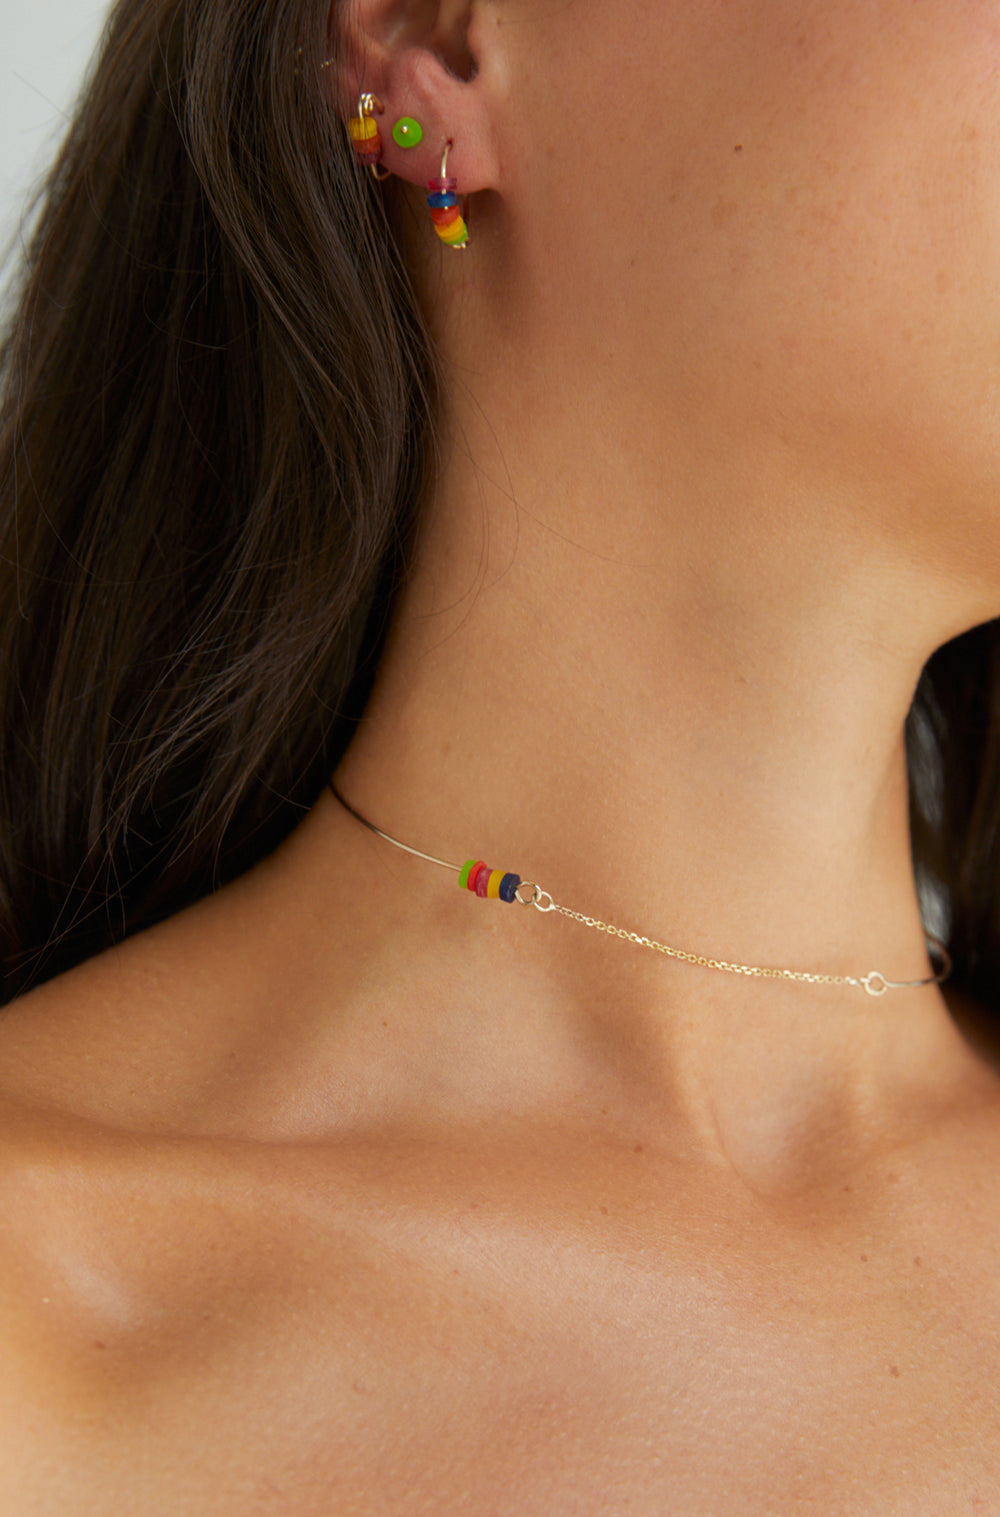 The Rainbow Resin Pin | Solid Gold